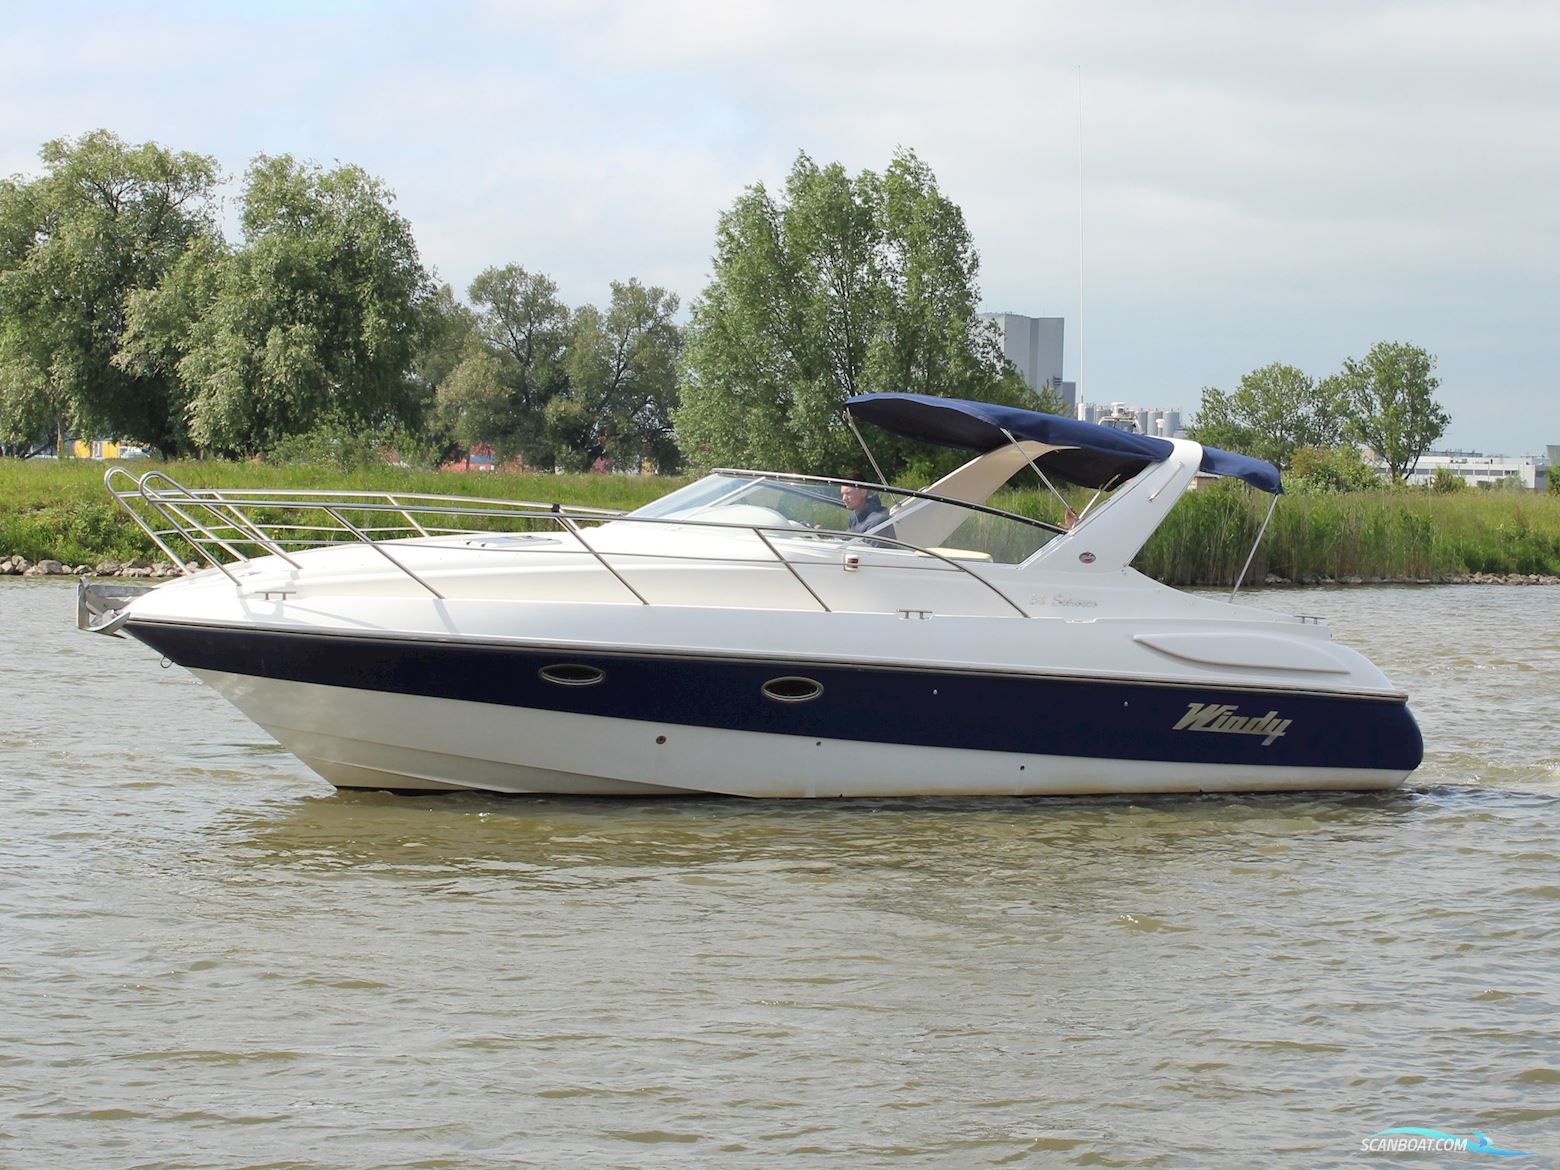 Windy Scirocco 32 Motor boat 1998, with Volvo Penta engine, The Netherlands